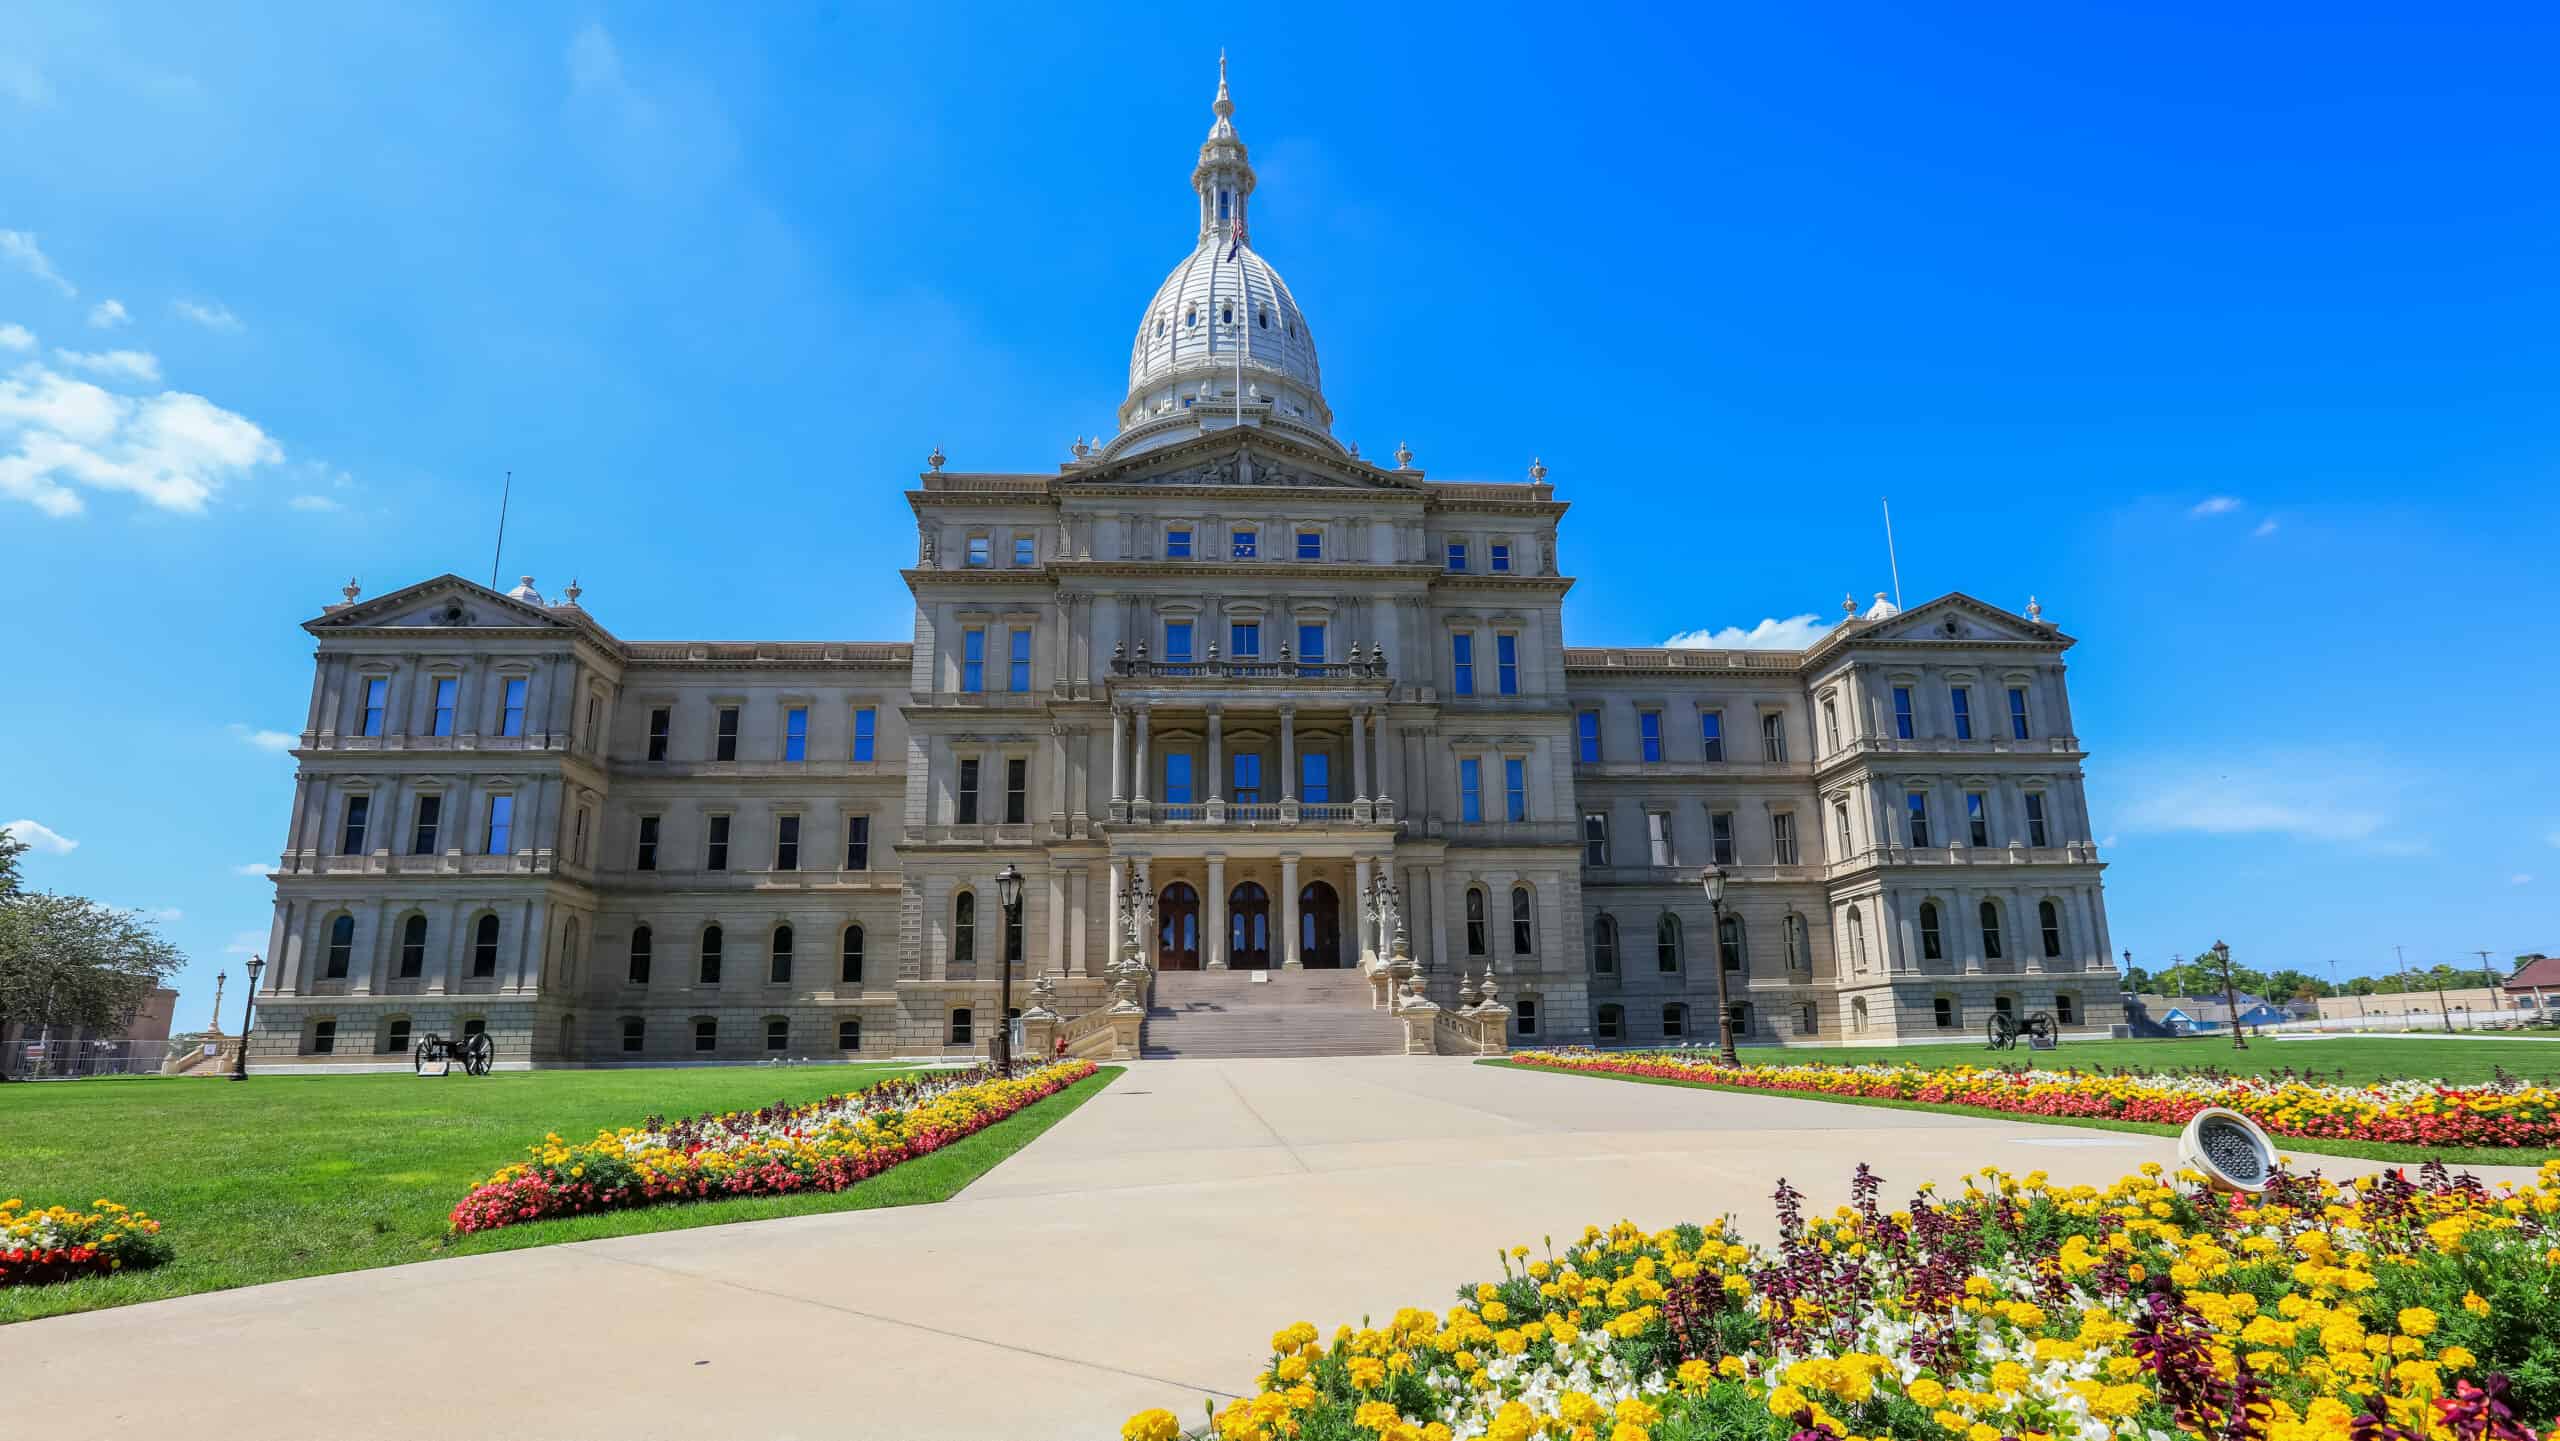 The Michigan State Capitol is the building that houses the legislative branch of the government of the U.S. state of Michigan. This is where Michigan's Kratom Regulation laws are debated and voted on.